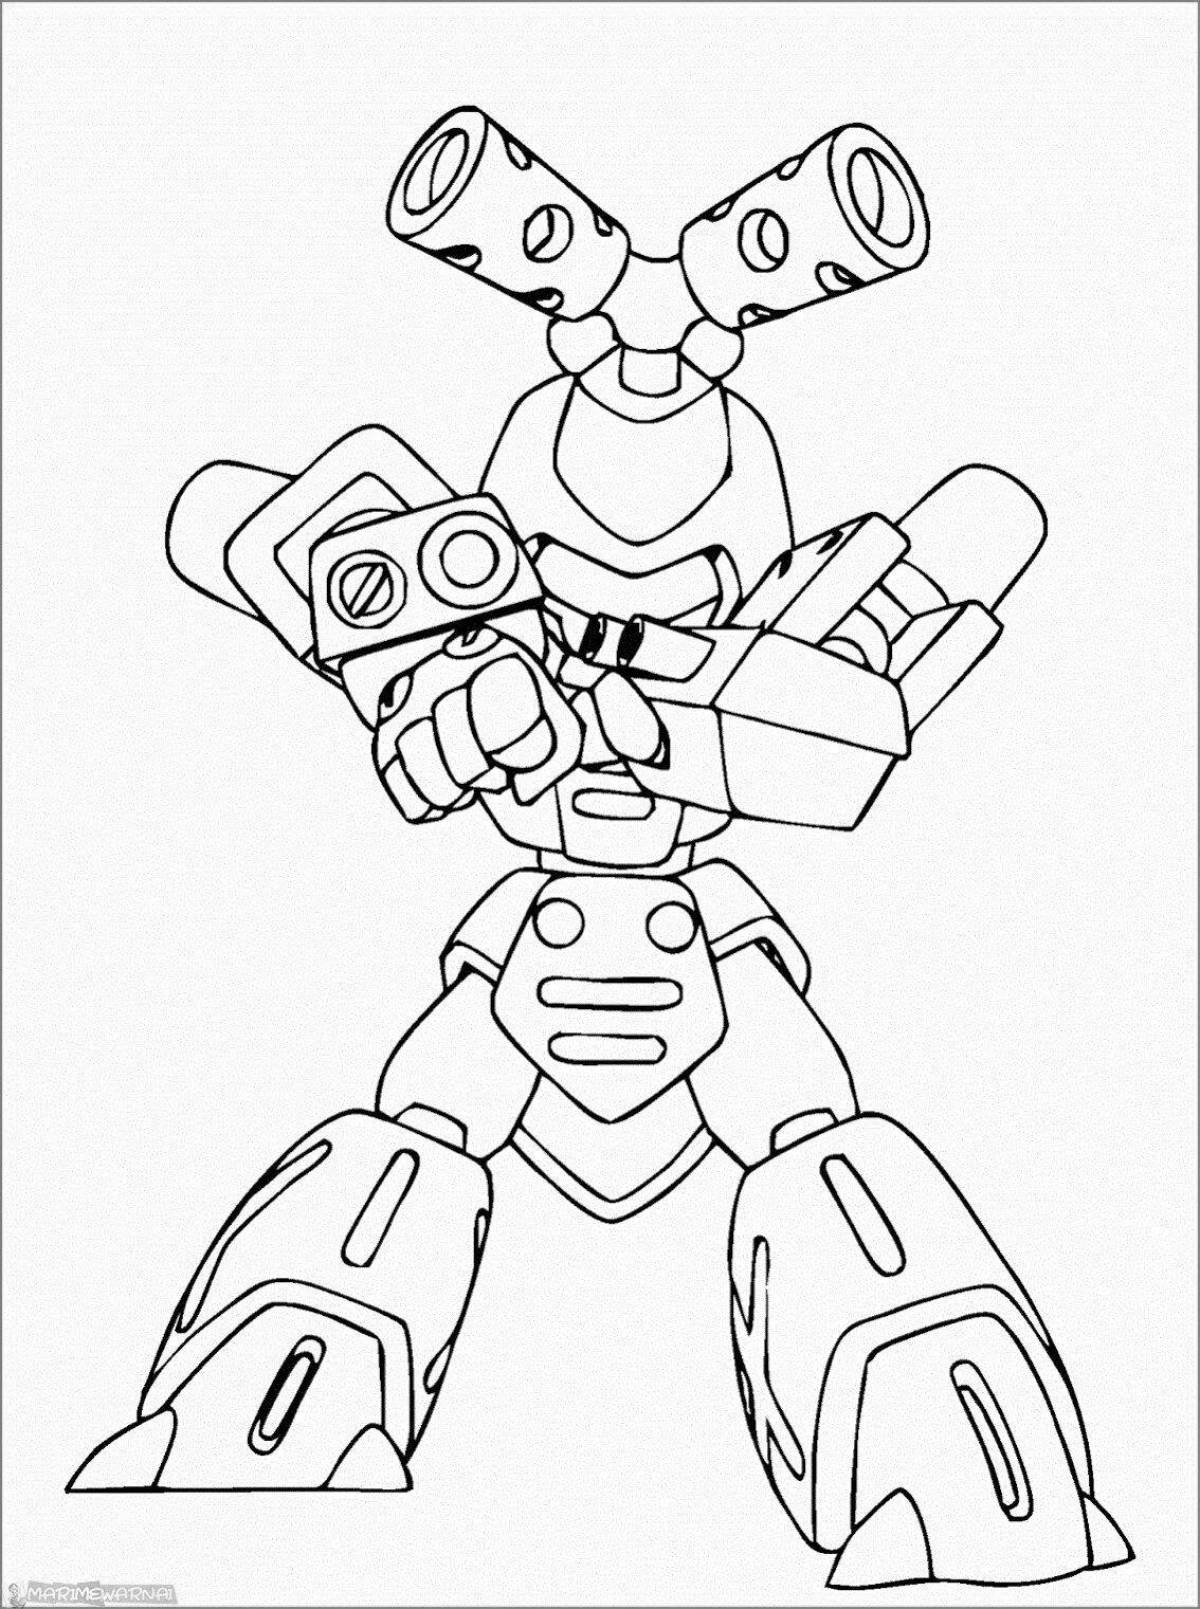 Awesome galactic robot coloring pages